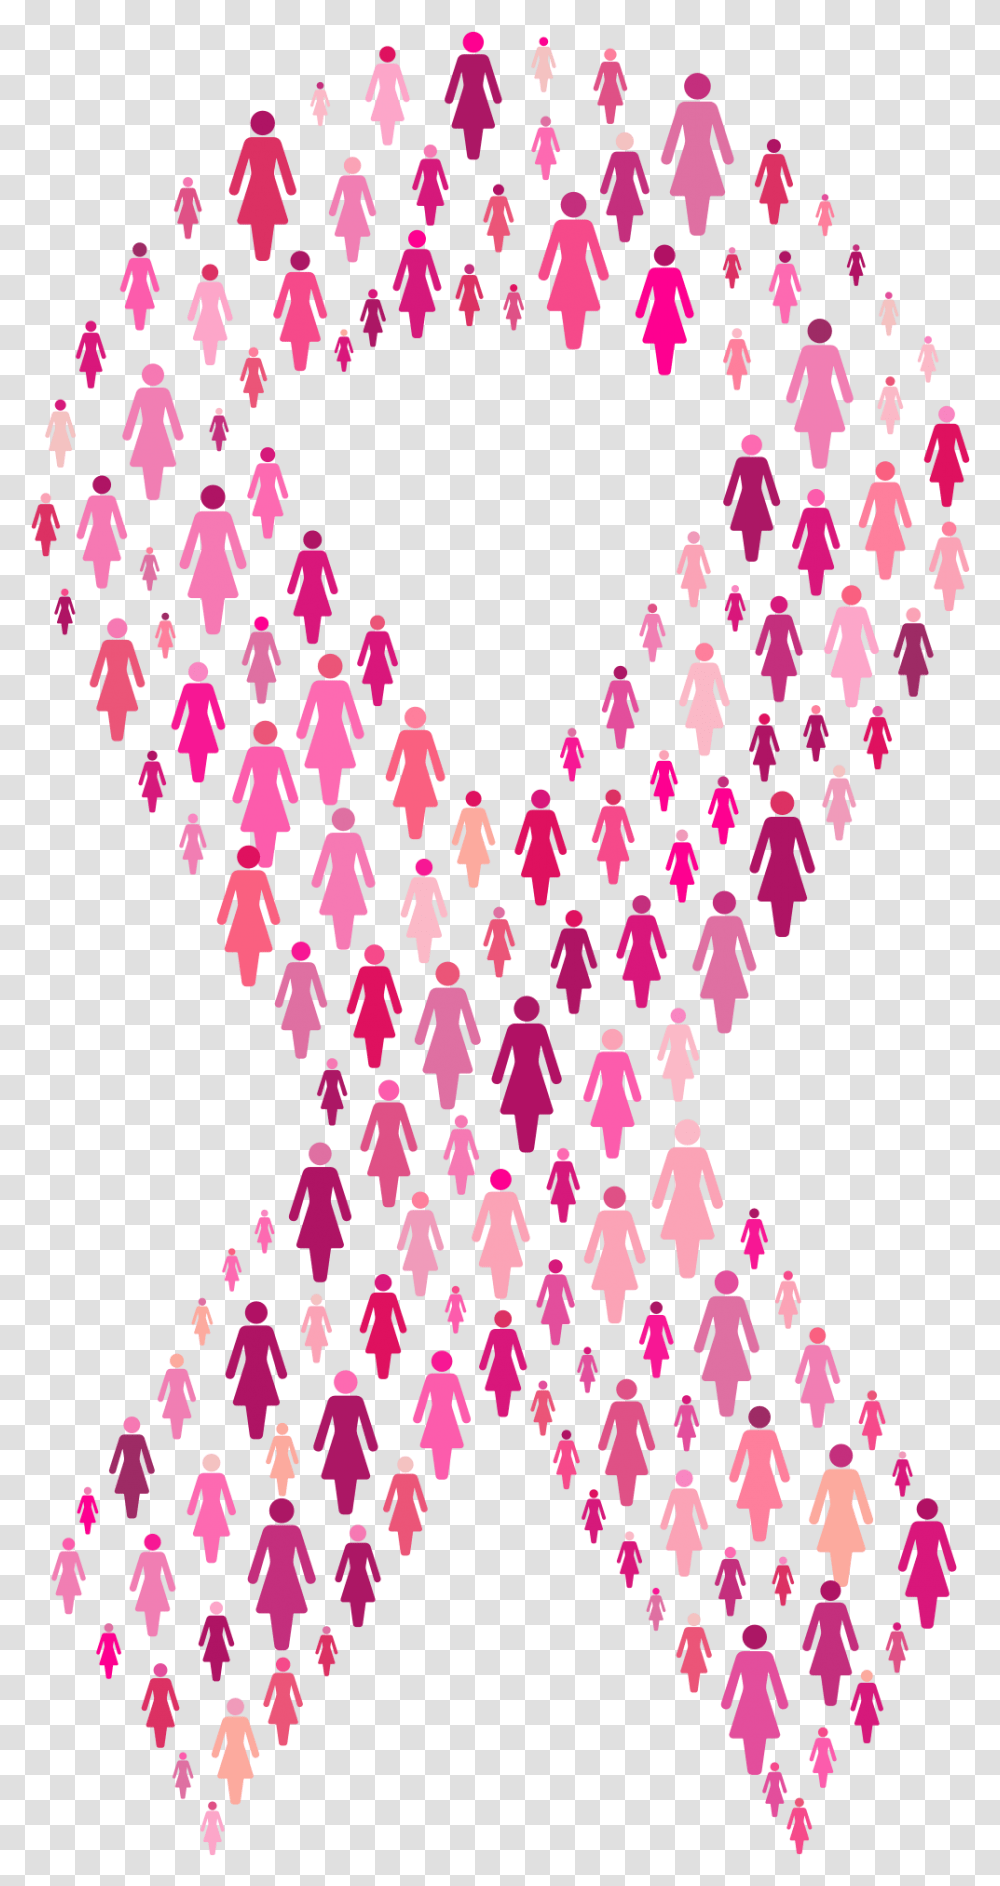 Pink Women Ribbon Openclipart Girly, Chandelier, Lamp, Purple, Accessories Transparent Png